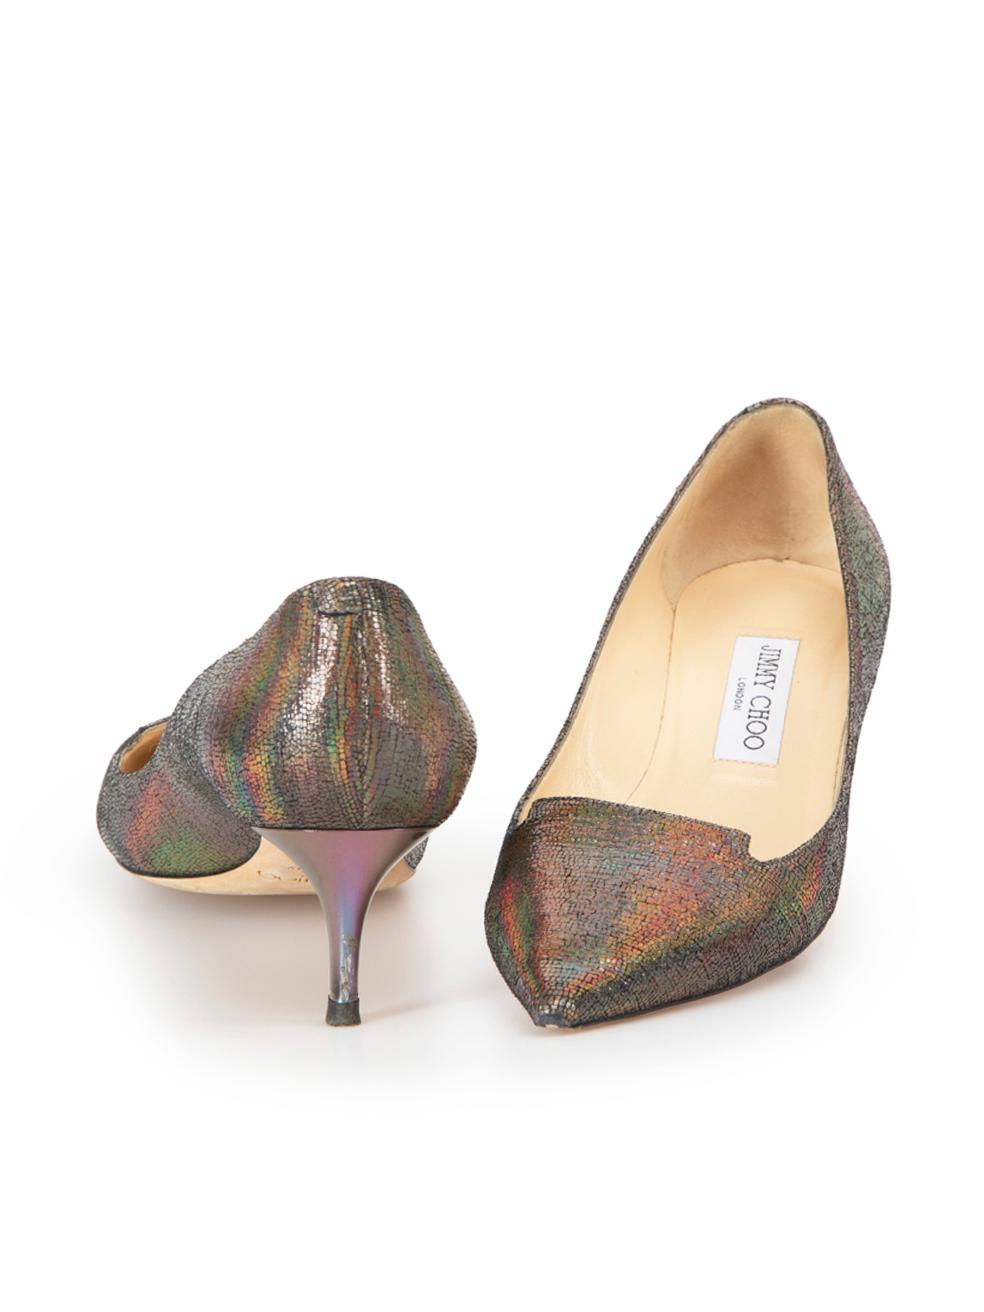 Brown Jimmy Choo Women's Anthracite Leather Allure Holographic Printed Pumps